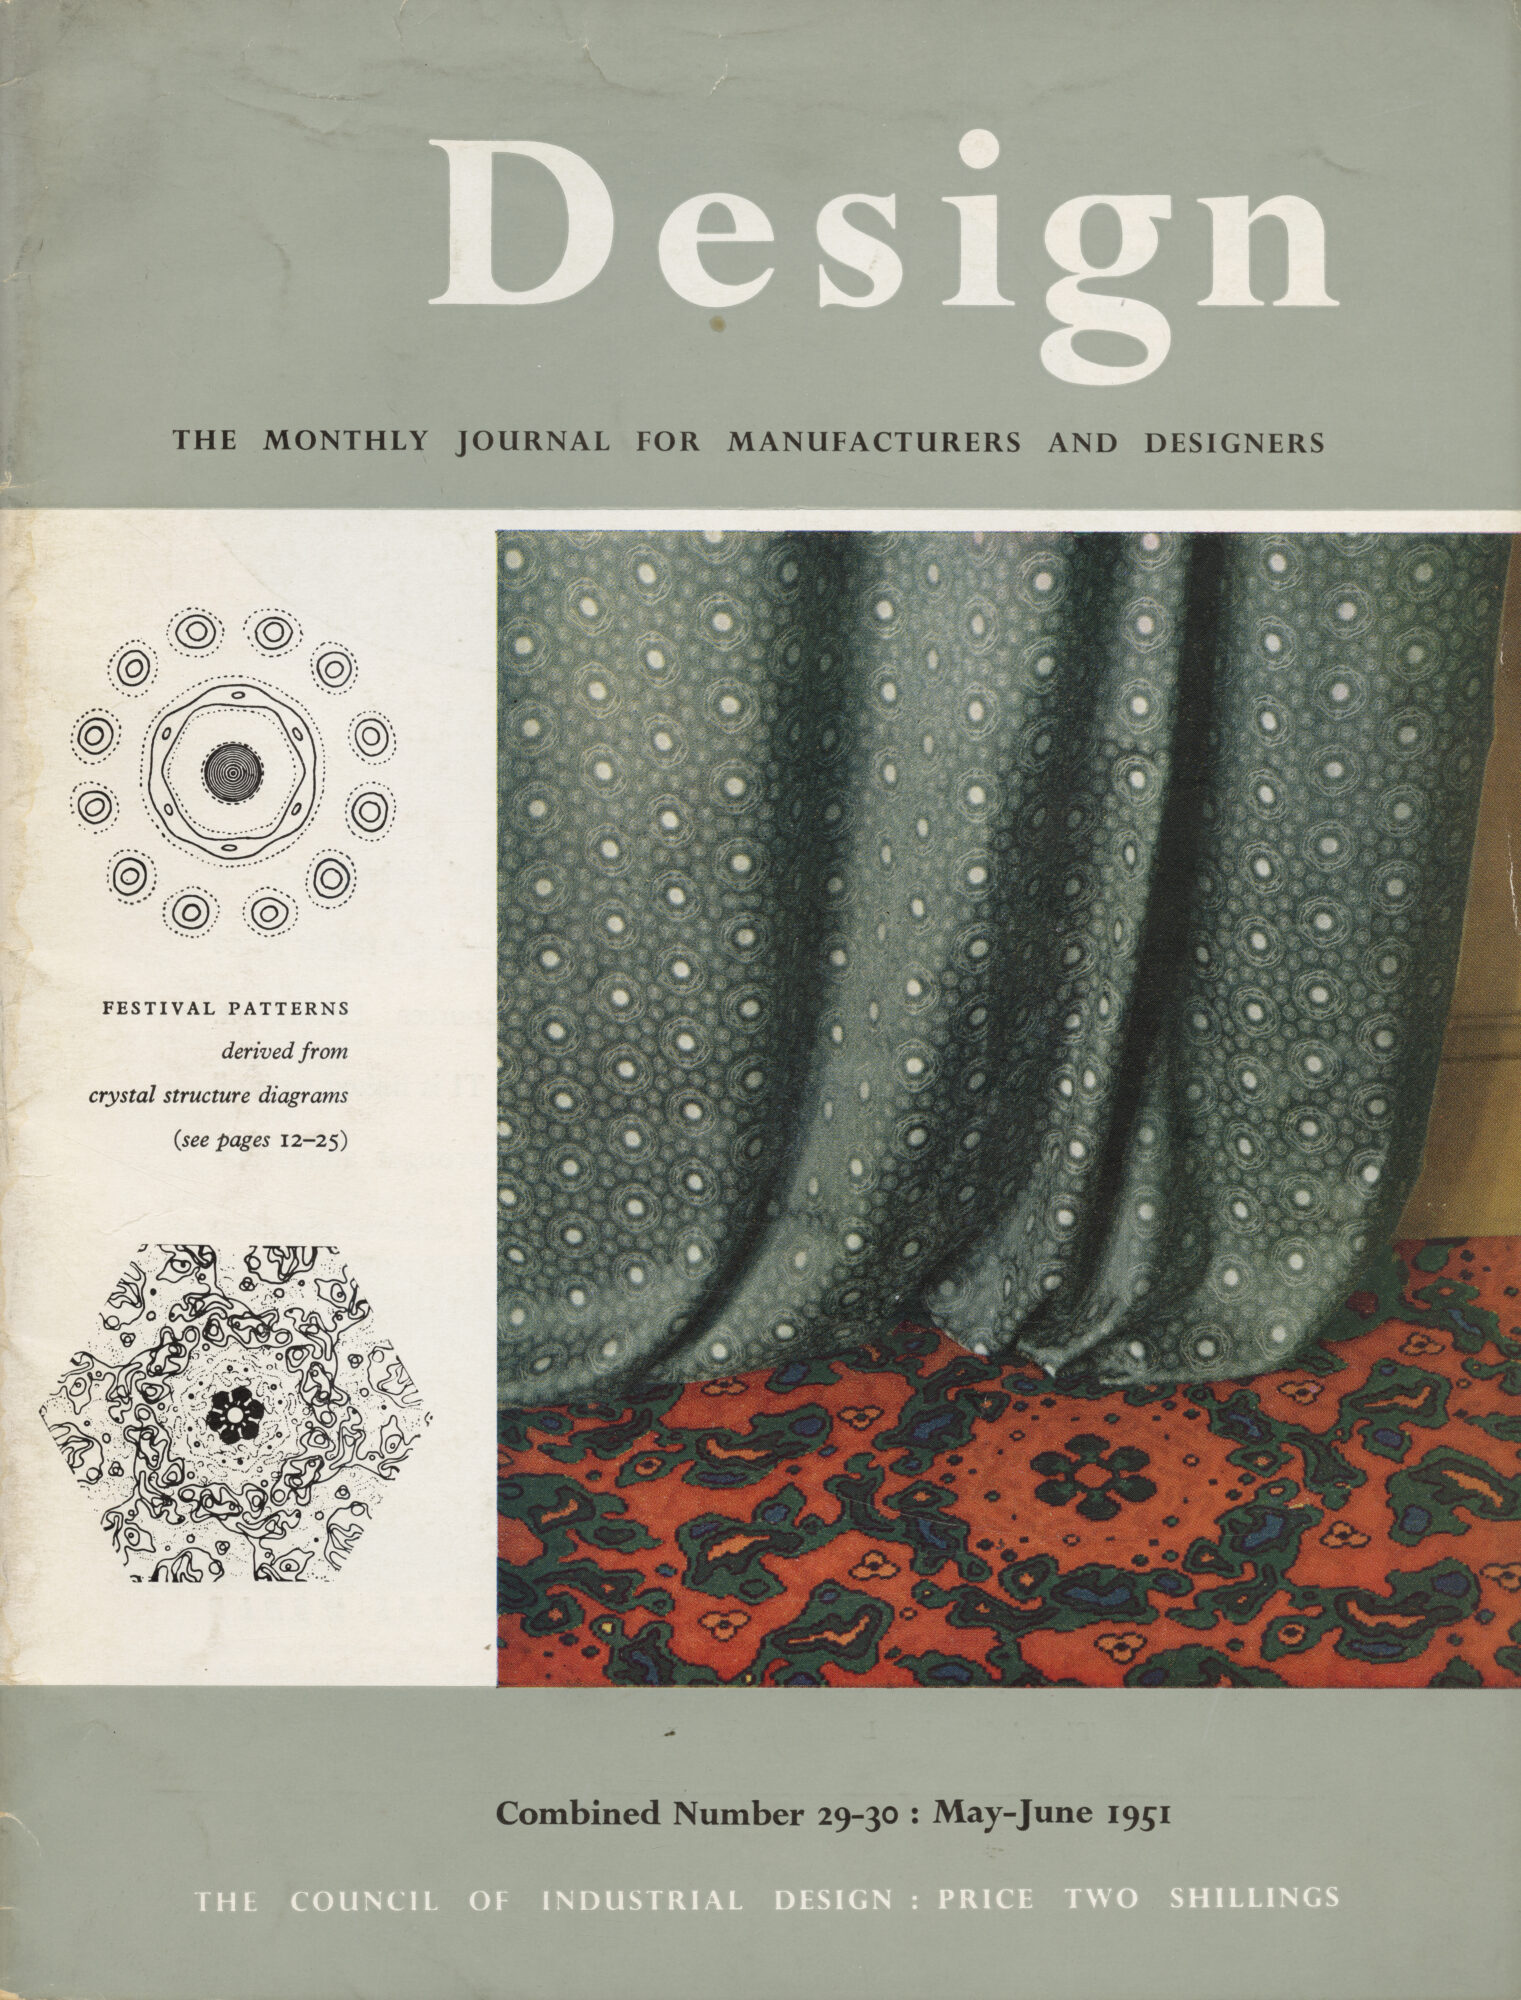 Front cover of 'Design' magazine, Combined Number 29-30 May-June 1951, showing grey and red based curtain fabrics printed with design inspired by crystal structure diagram